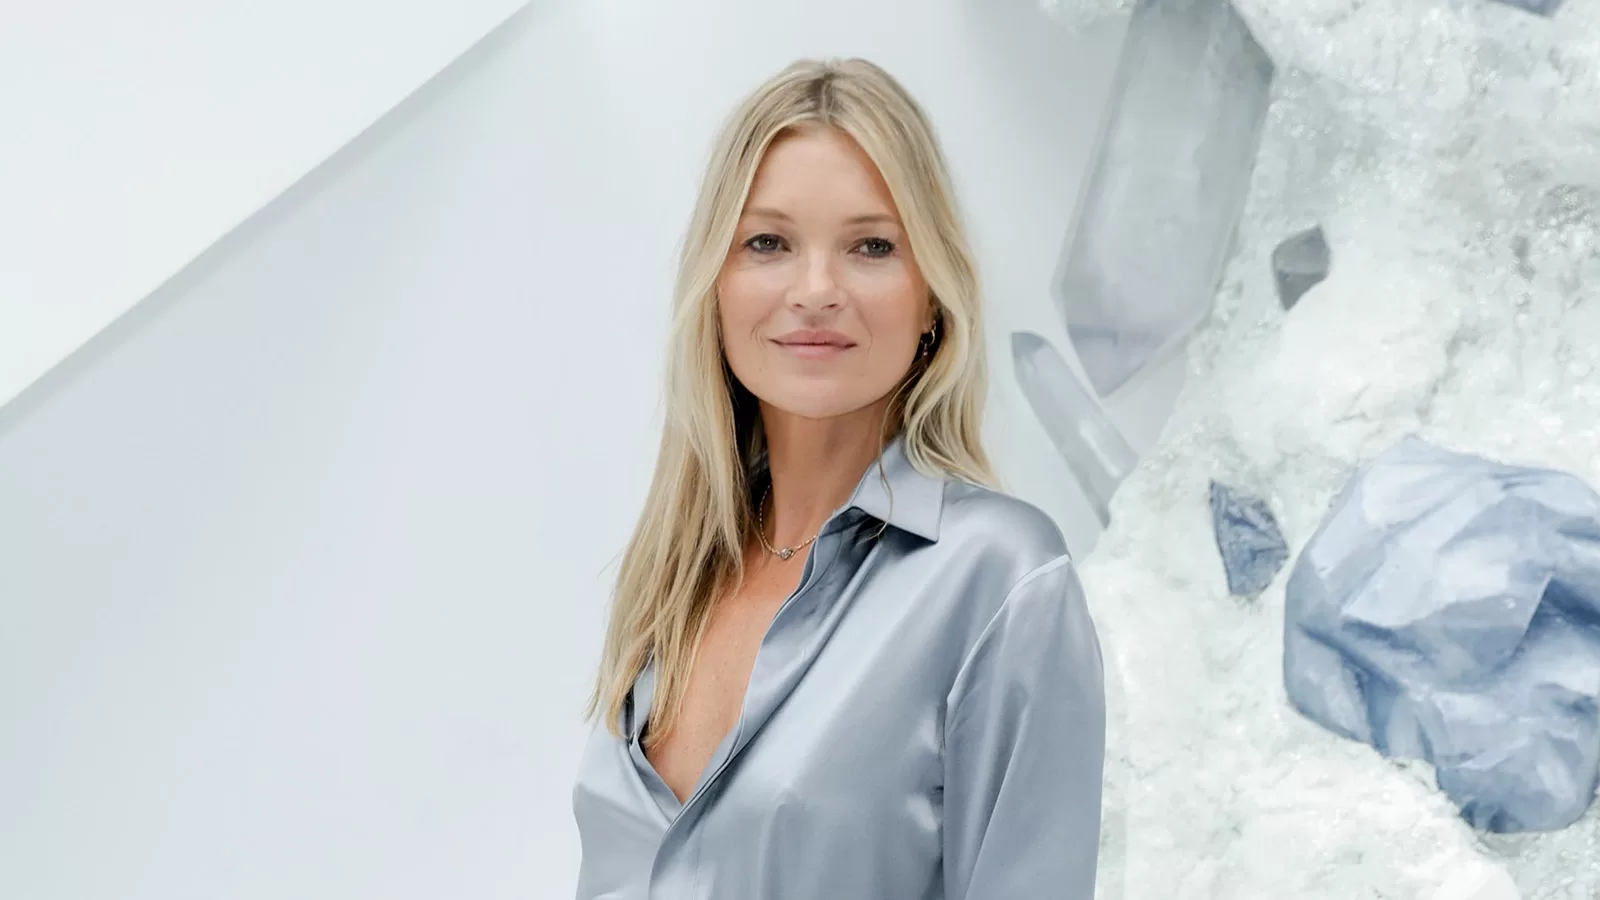 Read more about the article The image of Kate Moss in which she is unrecognizable